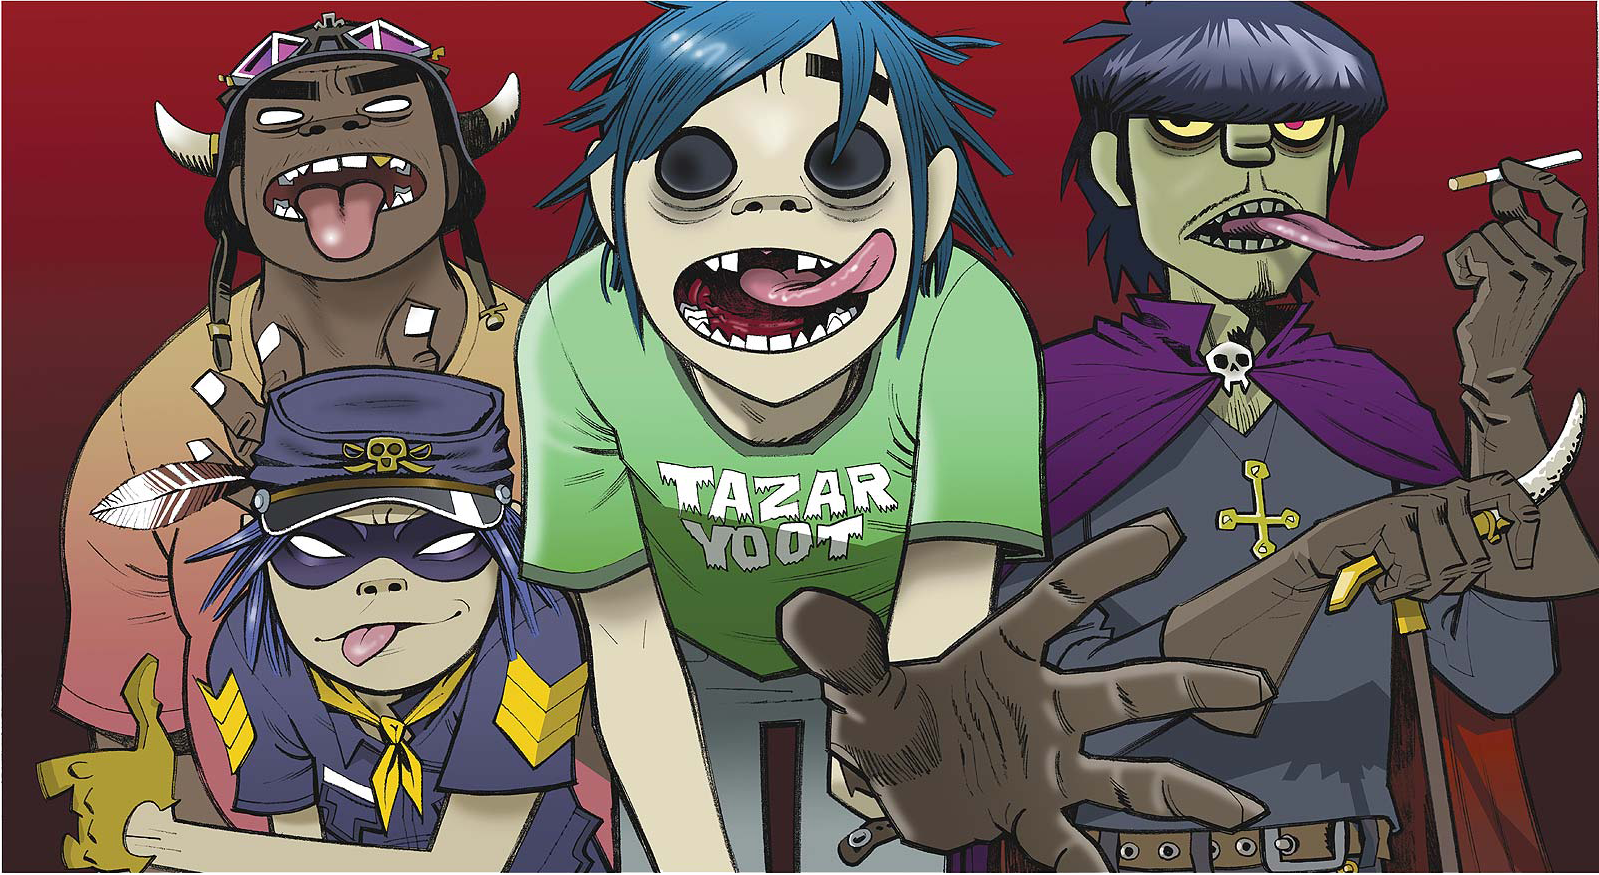 Gorillaz: The future is coming on